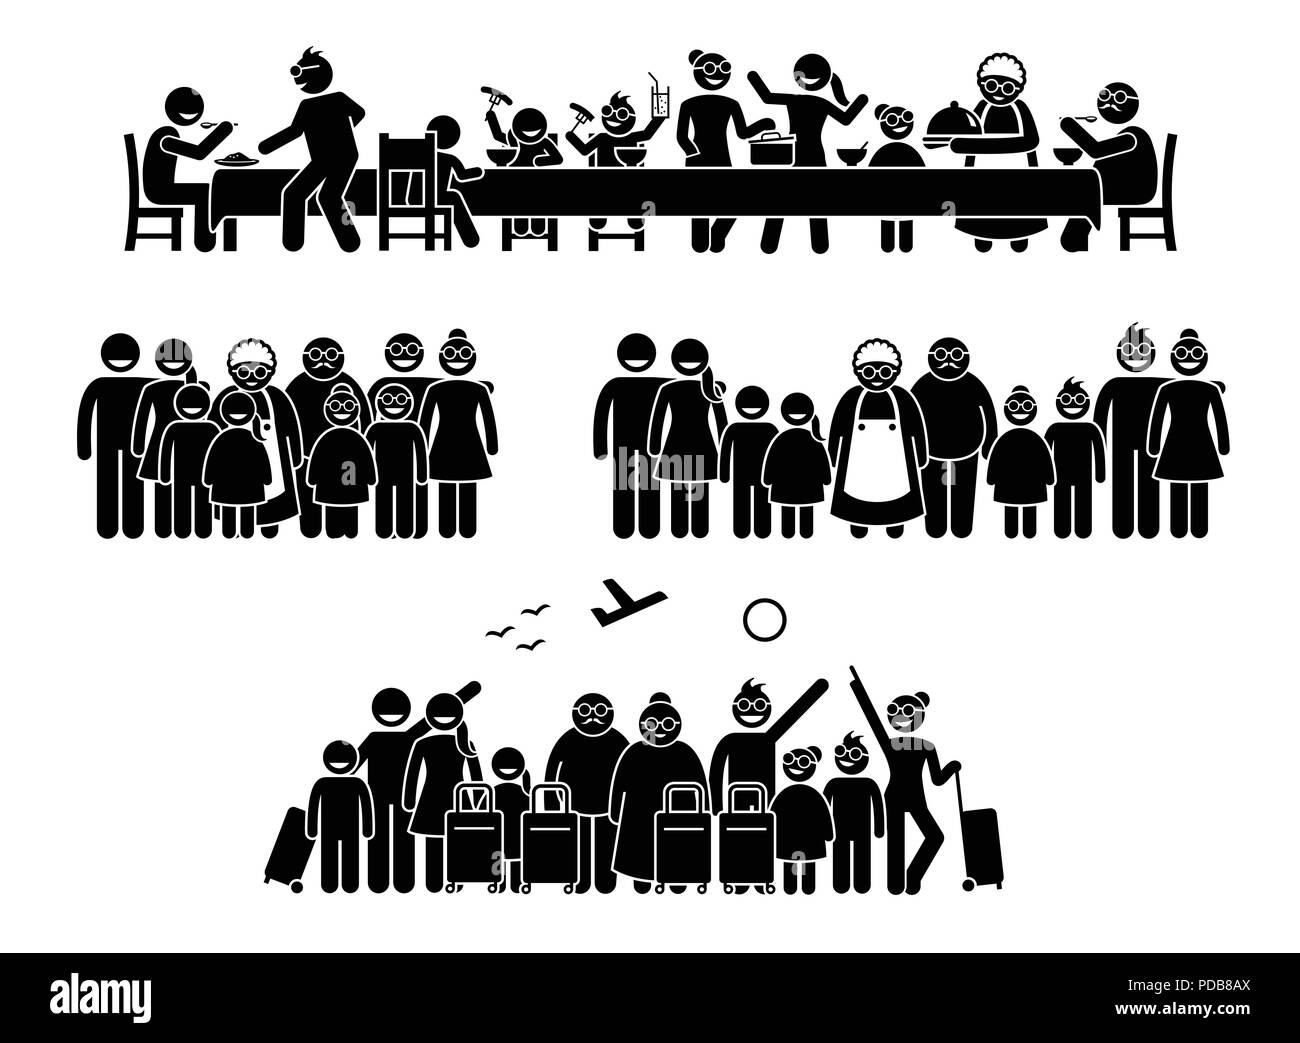 Big family and relatives reunion, gathering and activities. Stick figure pictogram depicts family and relatives getting together for a meal, vacation. Stock Vector